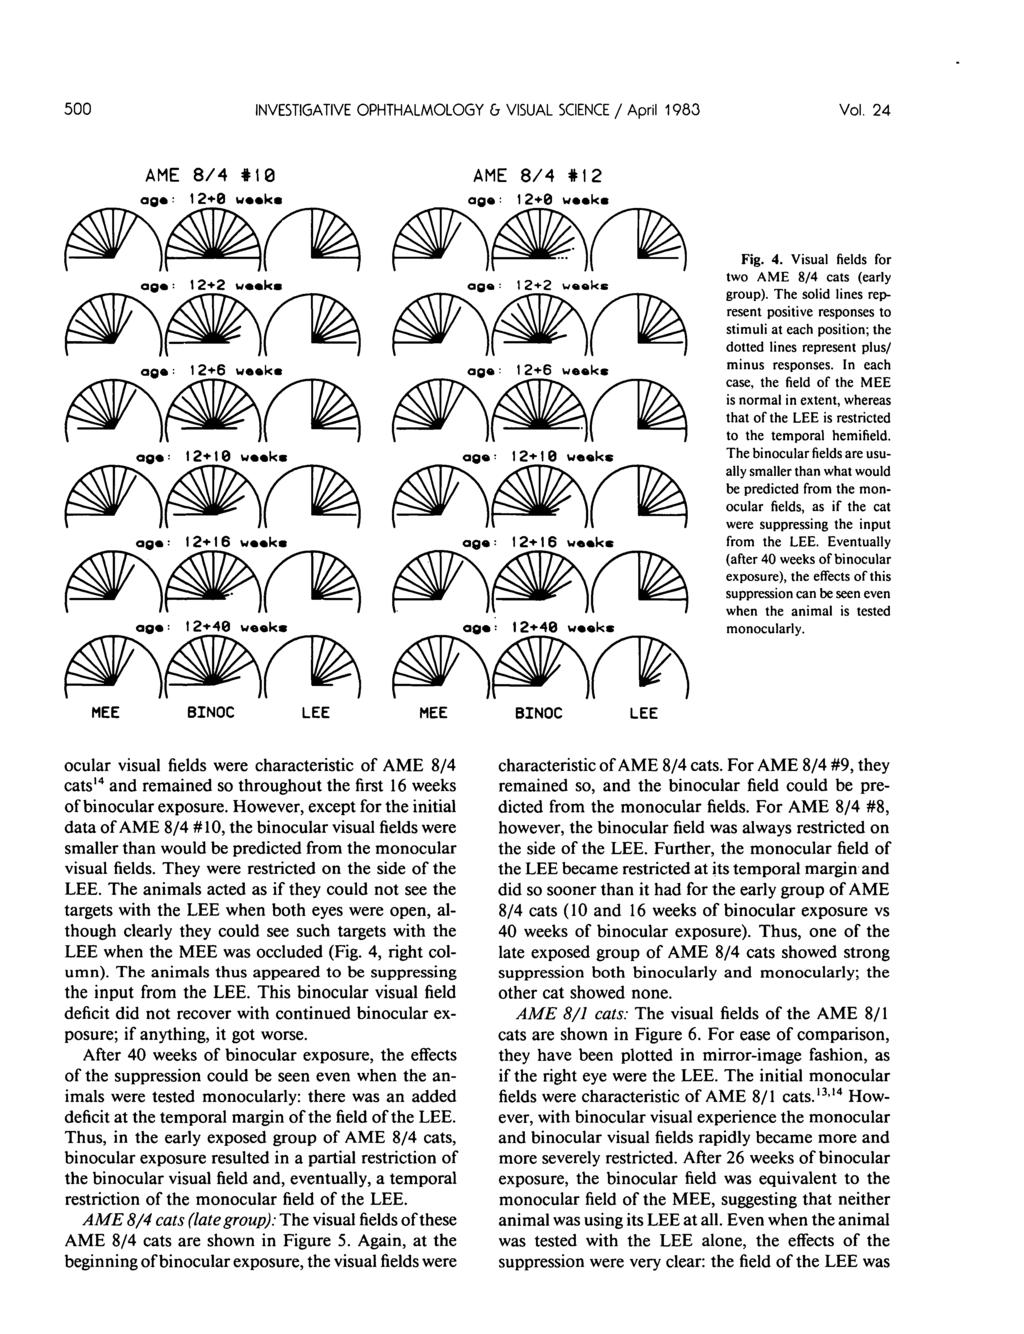 500 INVESTIGATIVE OPHTHALMOLOGY & VISUAL SCIENCE / April 1983 Vol. 24 AME 8/4 #10 ag*: 12+0 w««ka AME 8/4 #12 ag«: 12+0 w*«k«fig. 4. Visual fields for two AME 8/4 cats (early group).